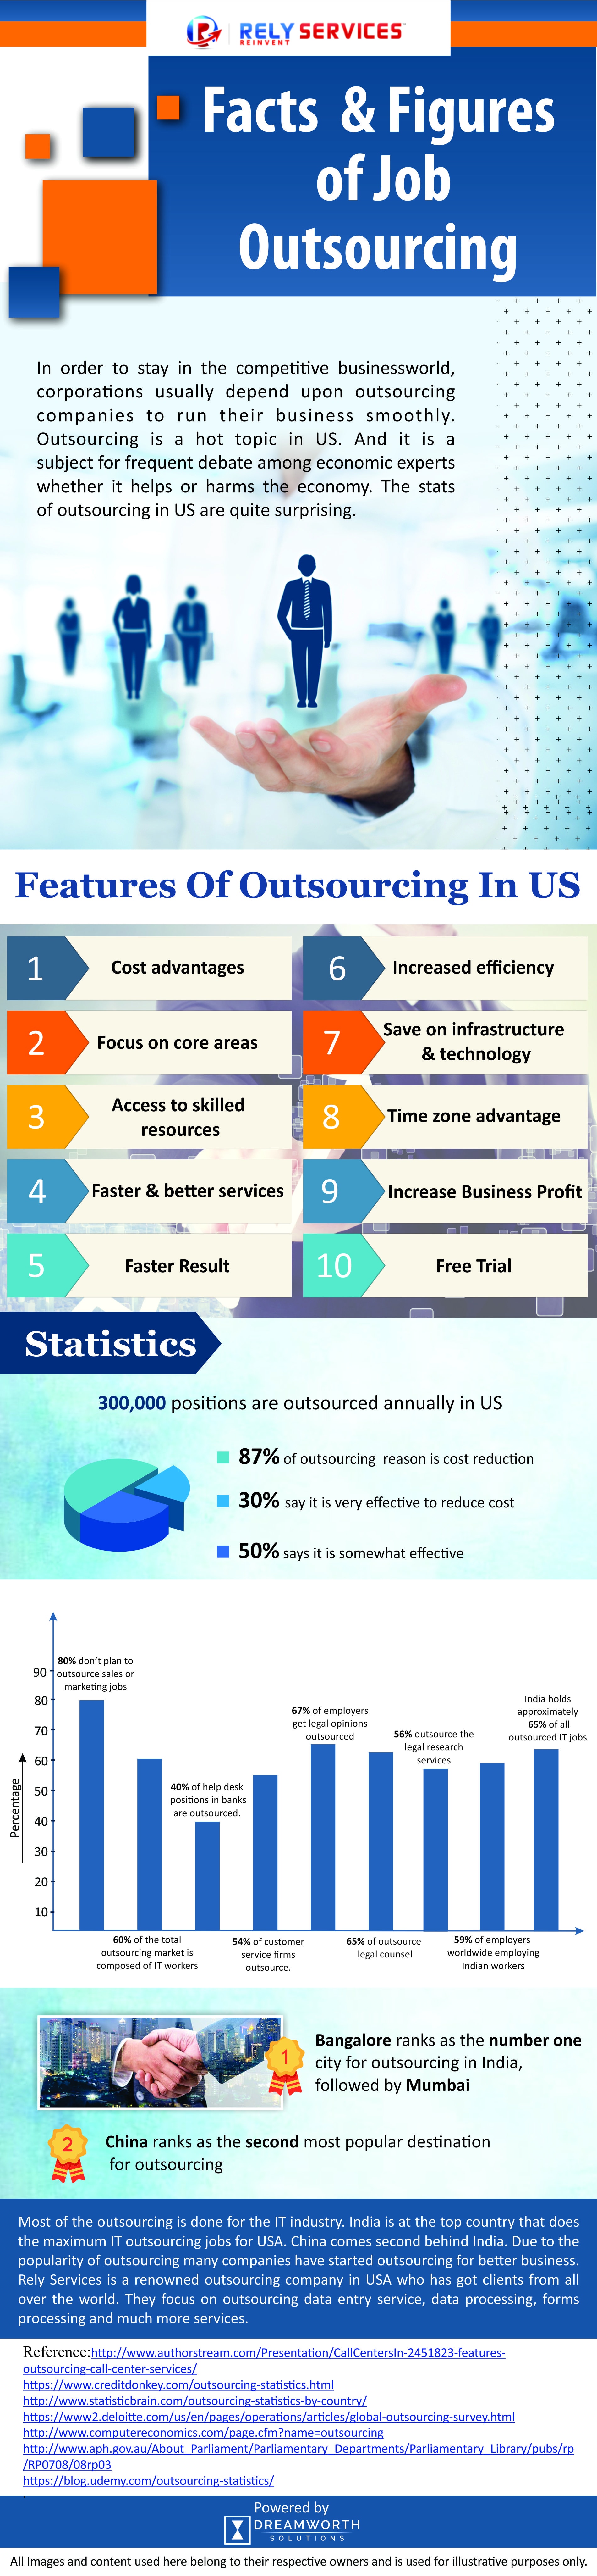 Rely Services outsourcing facts